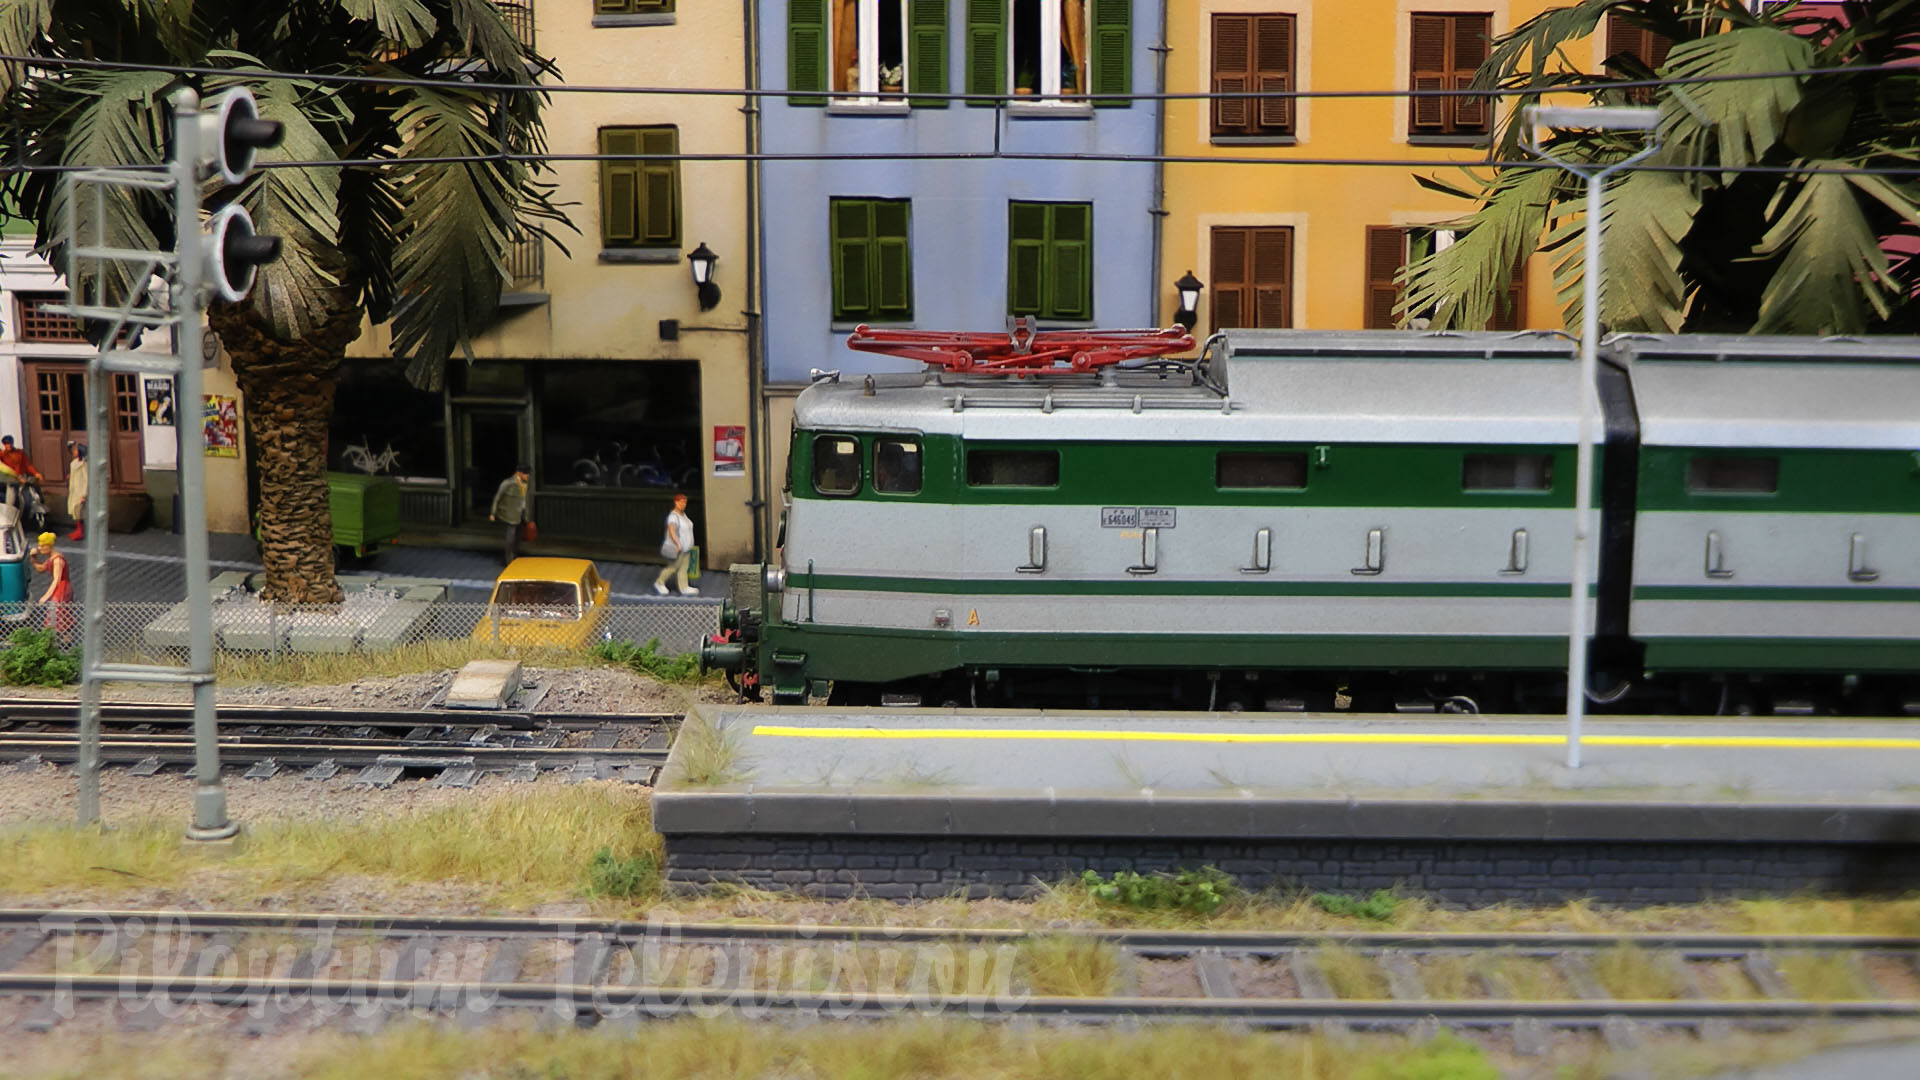 Model Railroad of Italy - Giacomo - 1/87 Scale ACME and Rivarossi Model Train Layout by Maurice Kleverwal